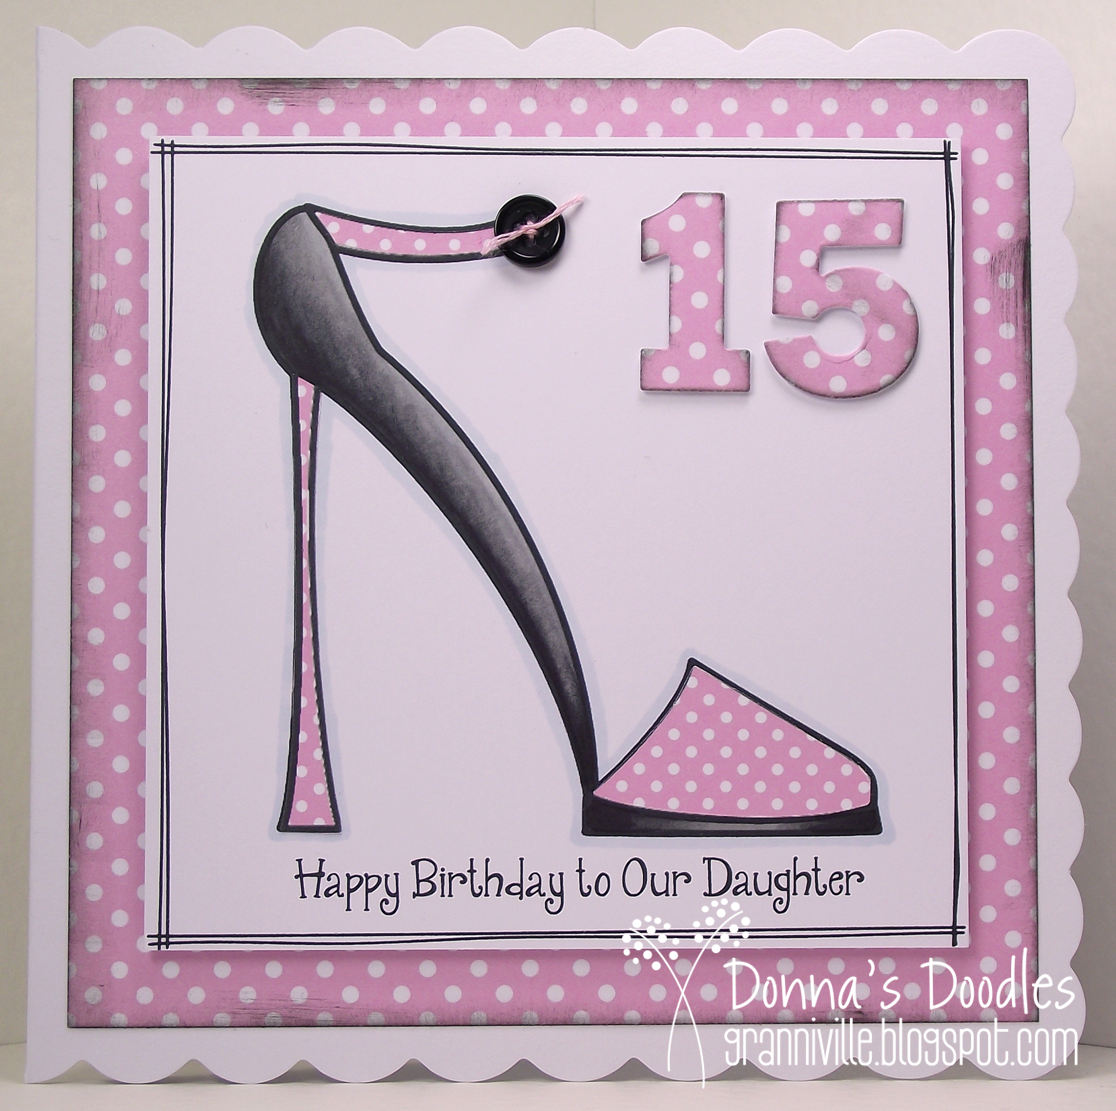 Donna's Doodles: Daughter Birthday Card